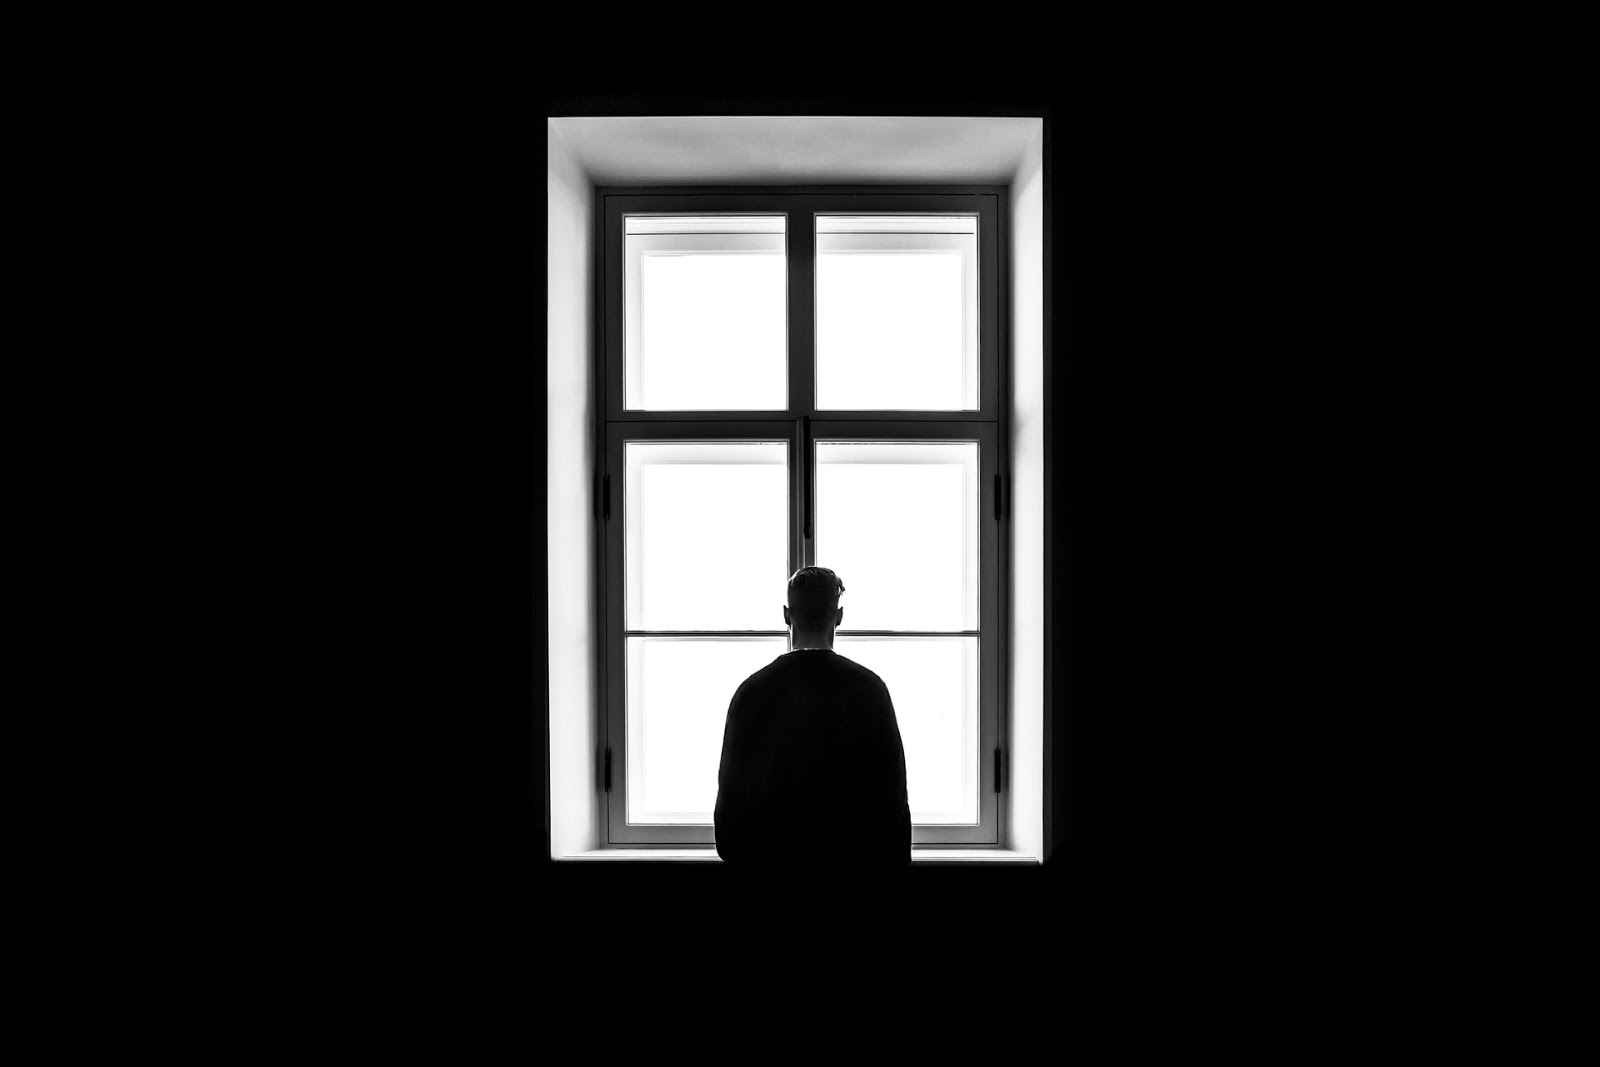 A man looking out a window symbolizing being alone.